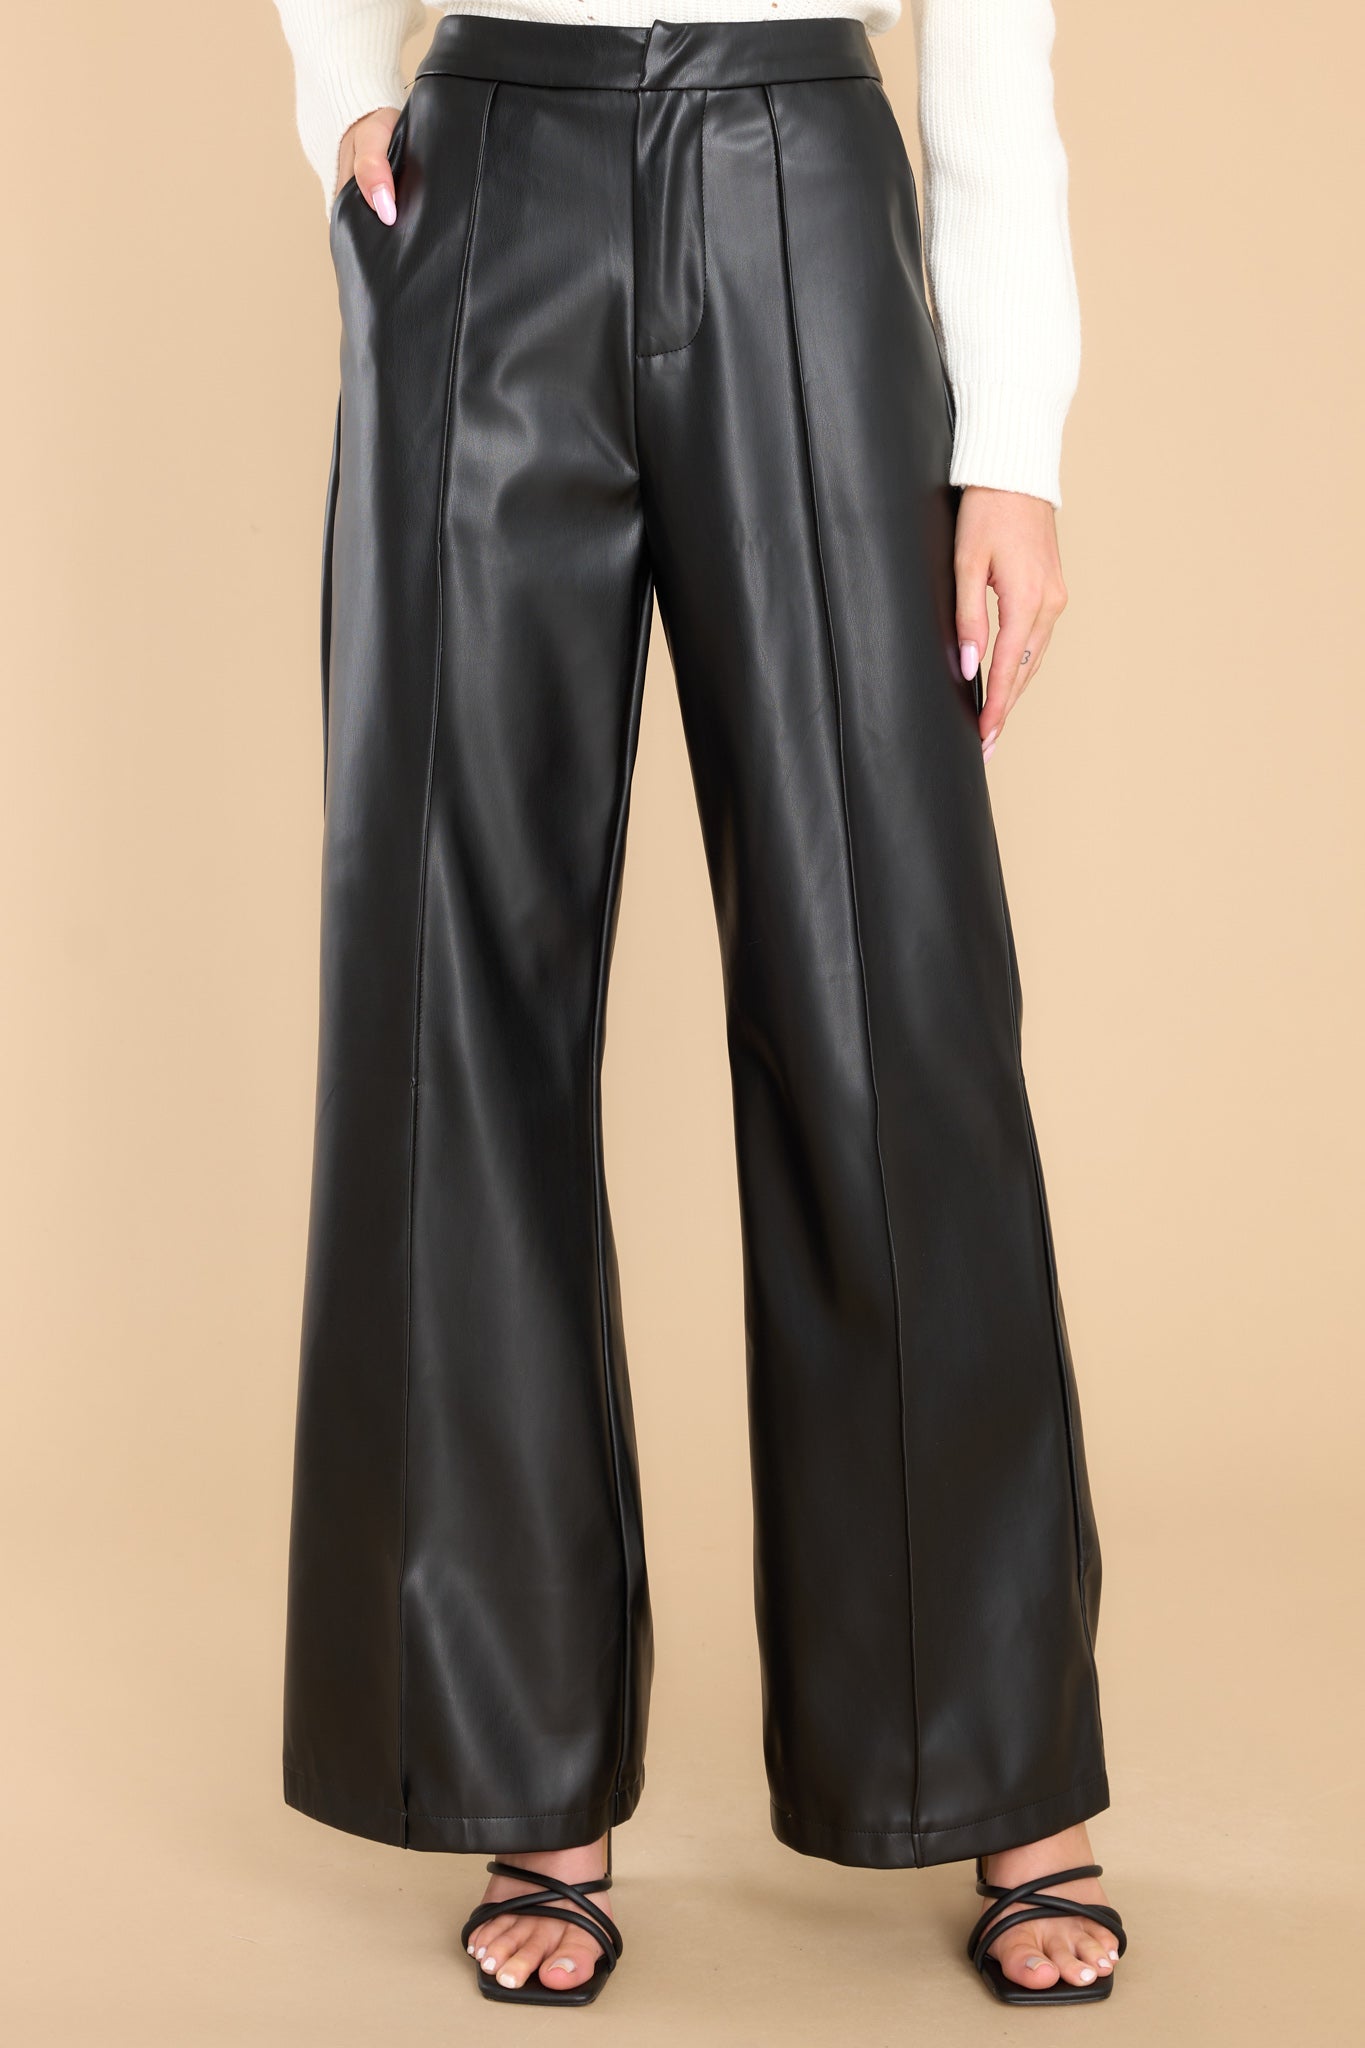 Stylish Black Leather Pants - All Bottoms | Red Dress